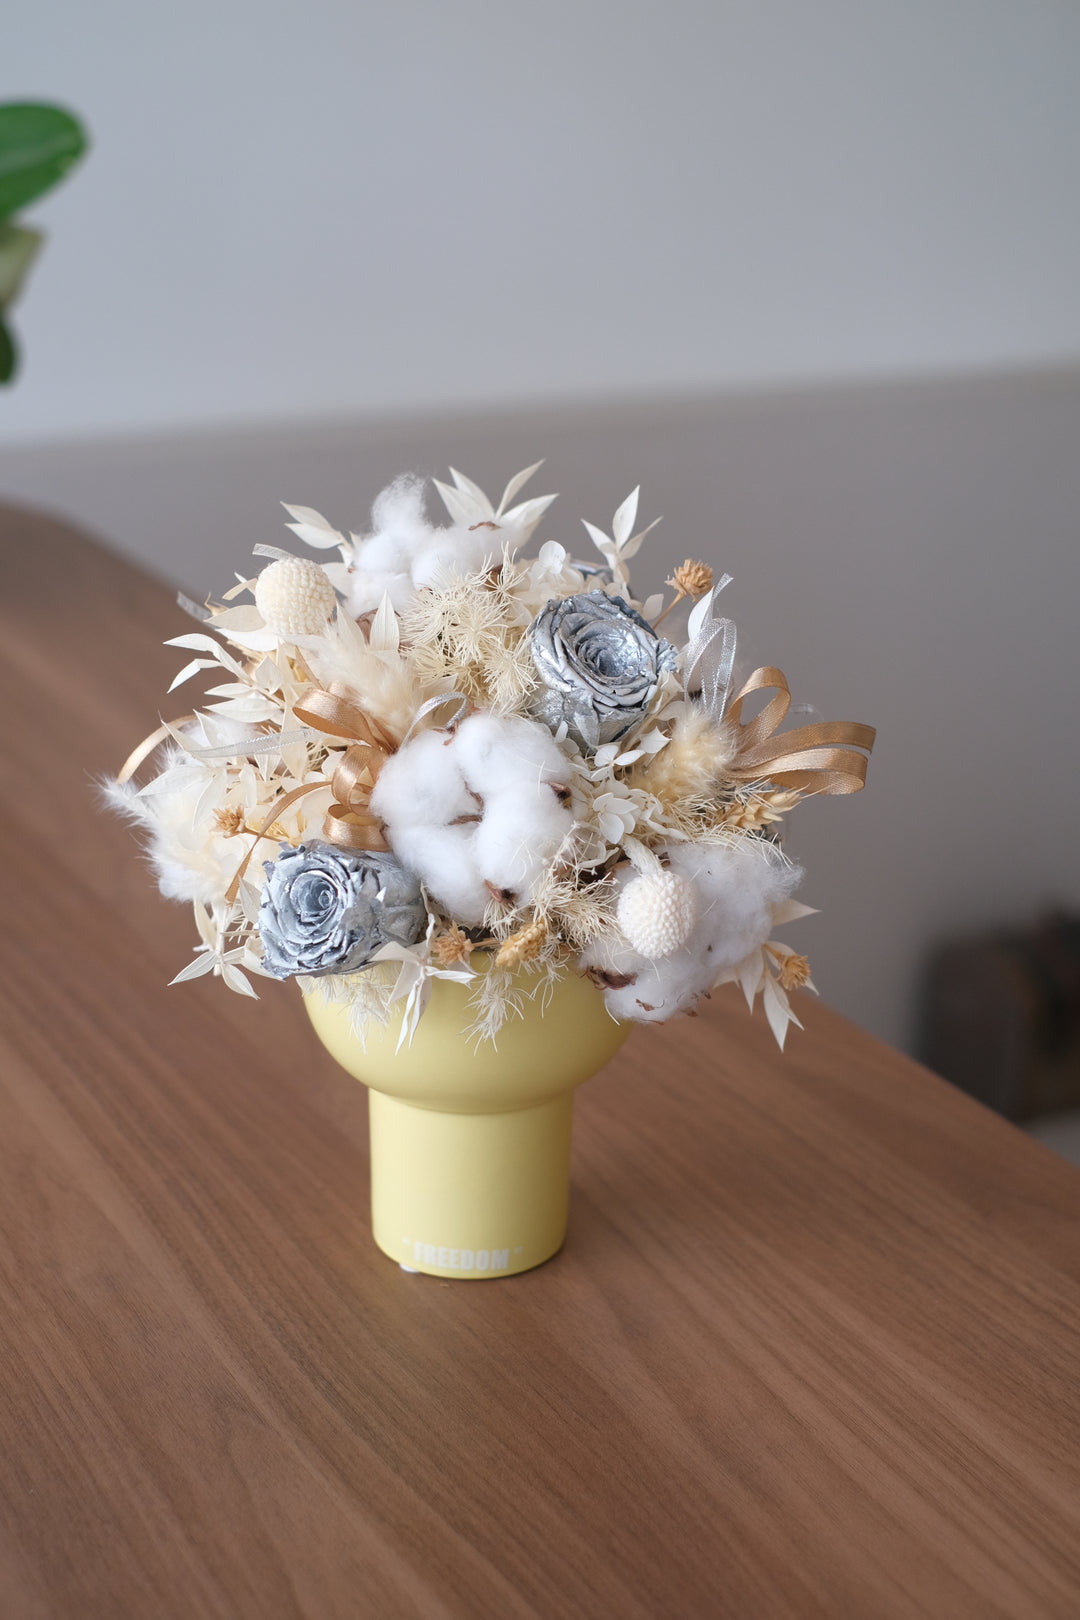 flower arrangements ideas with cotton, artificial flowers bouquet of flower arrangement, delivery gift rose and carnations 